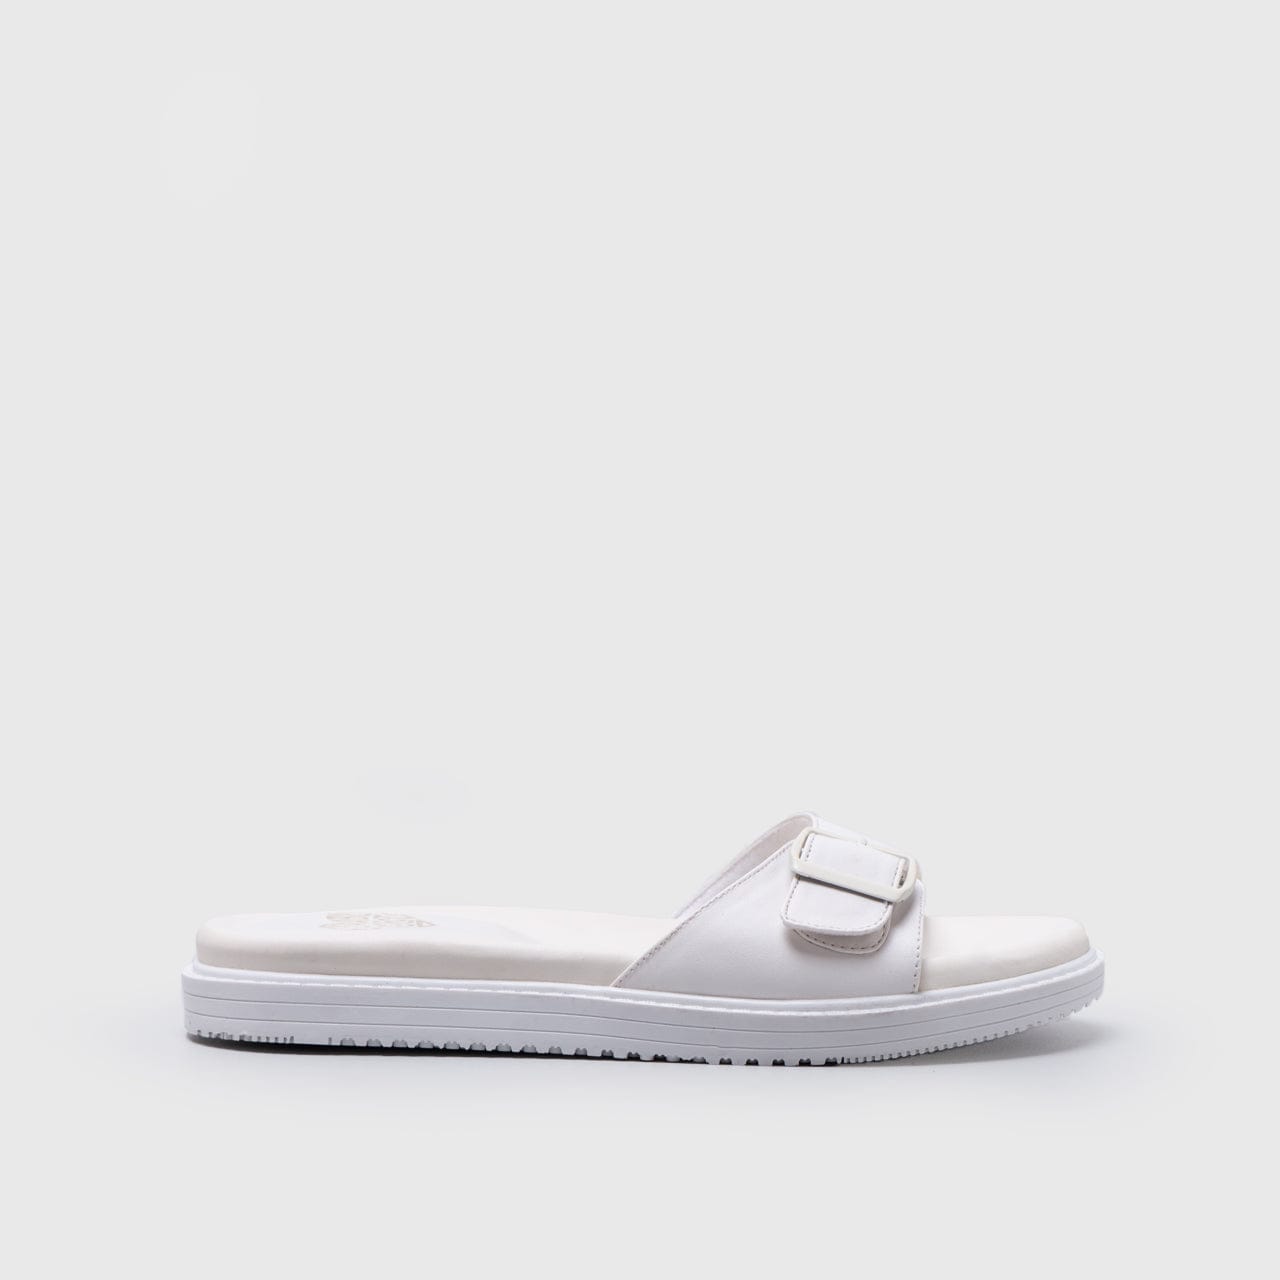 Adorable Projects Official Adorableprojects - Yurinta Sandals White - Sendal Wanita